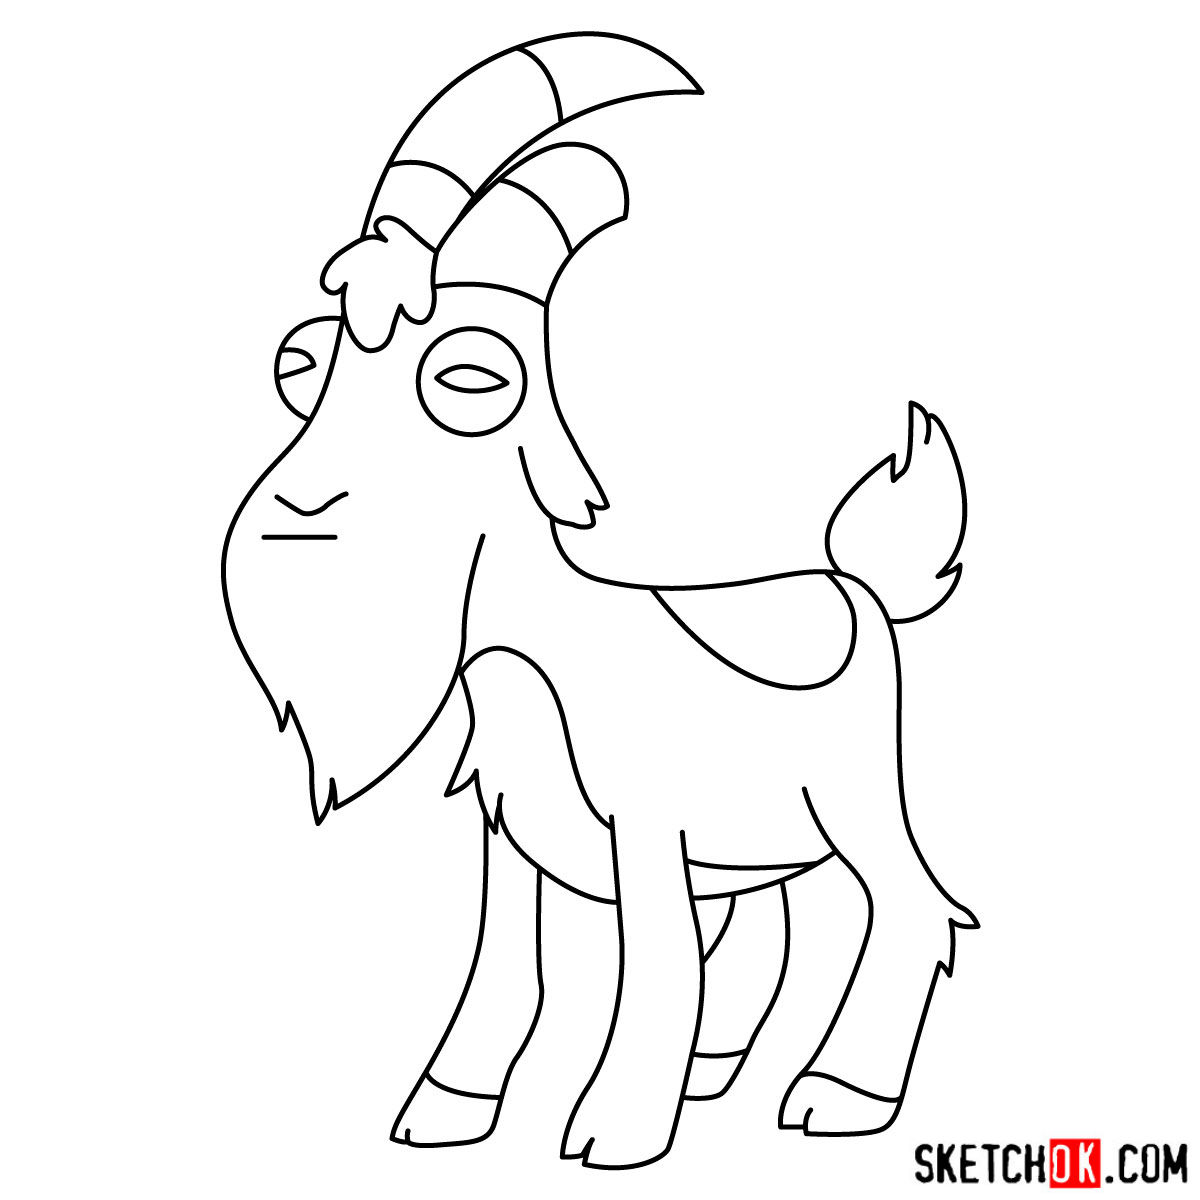 How to draw Gompers the goat - step 10